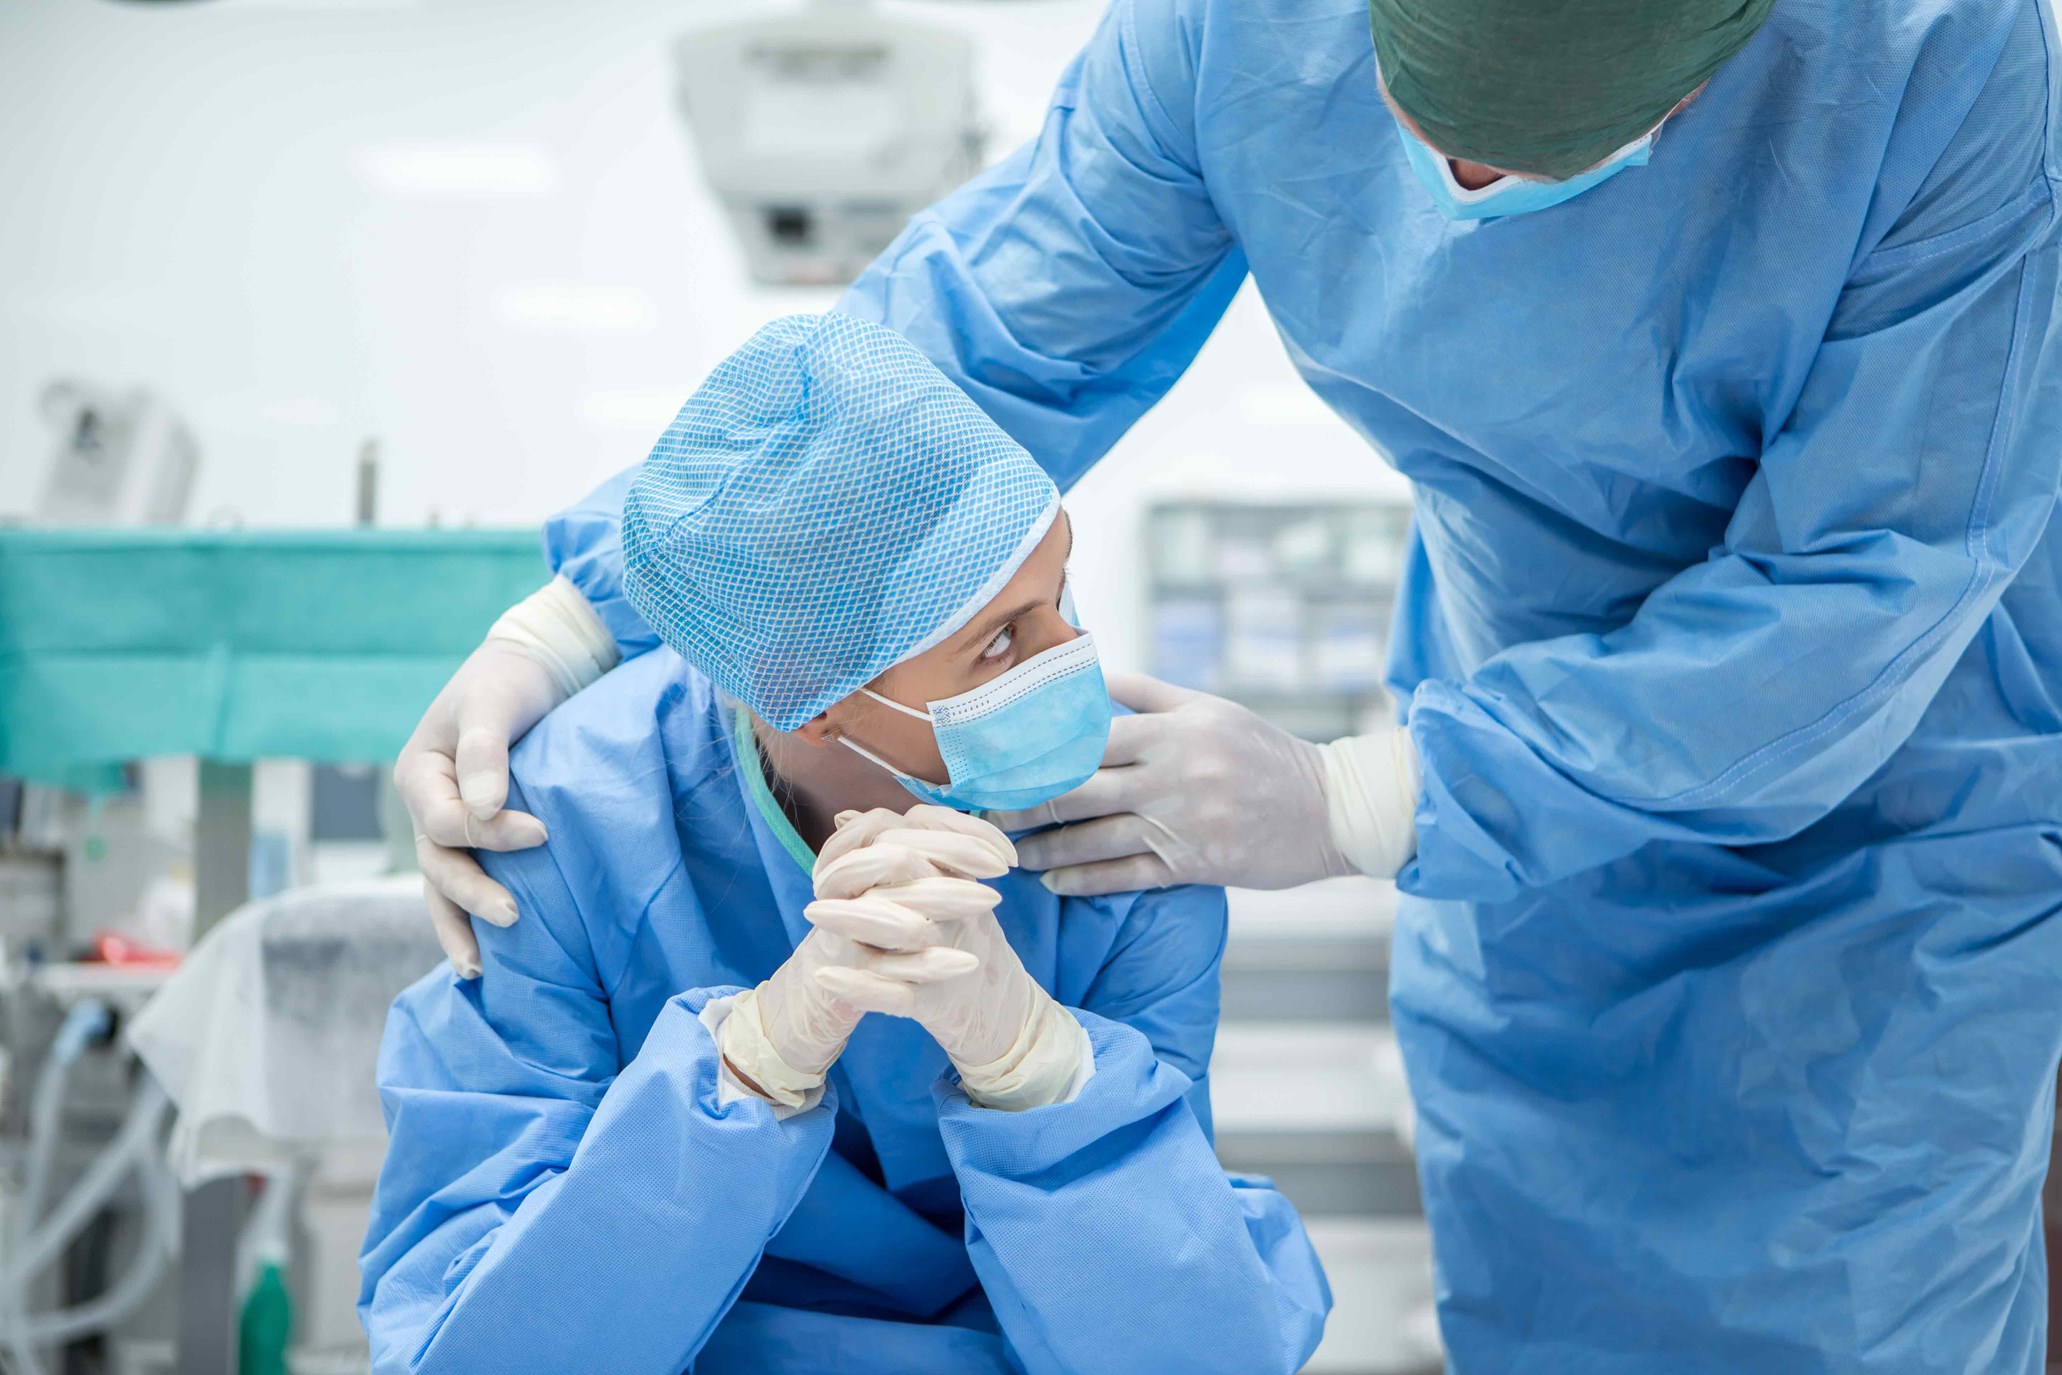 Detail of medical personnel in PPE in an operating room setup.